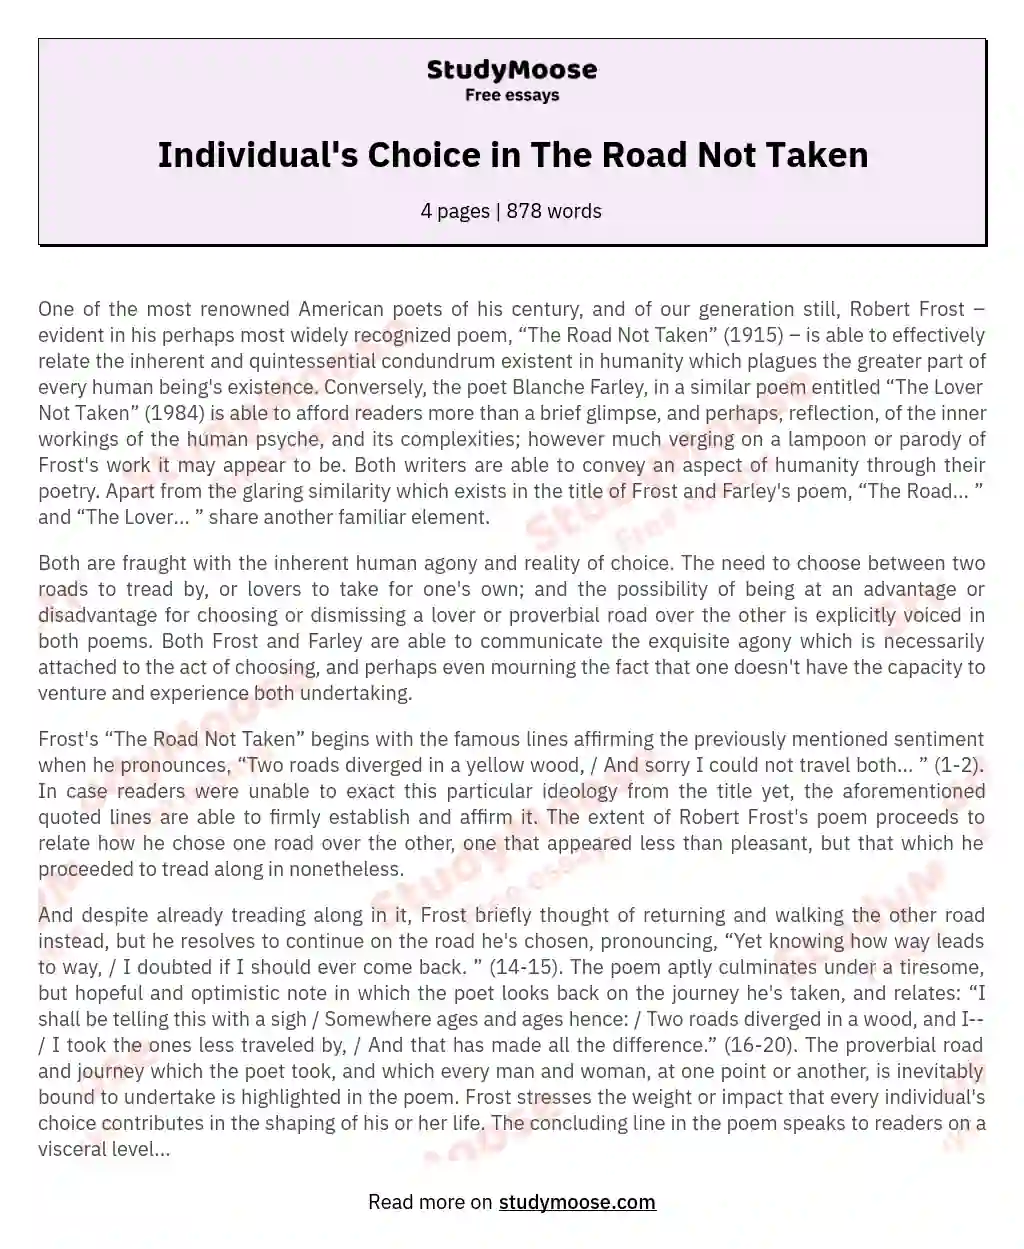 Individual's Choice in The Road Not Taken essay